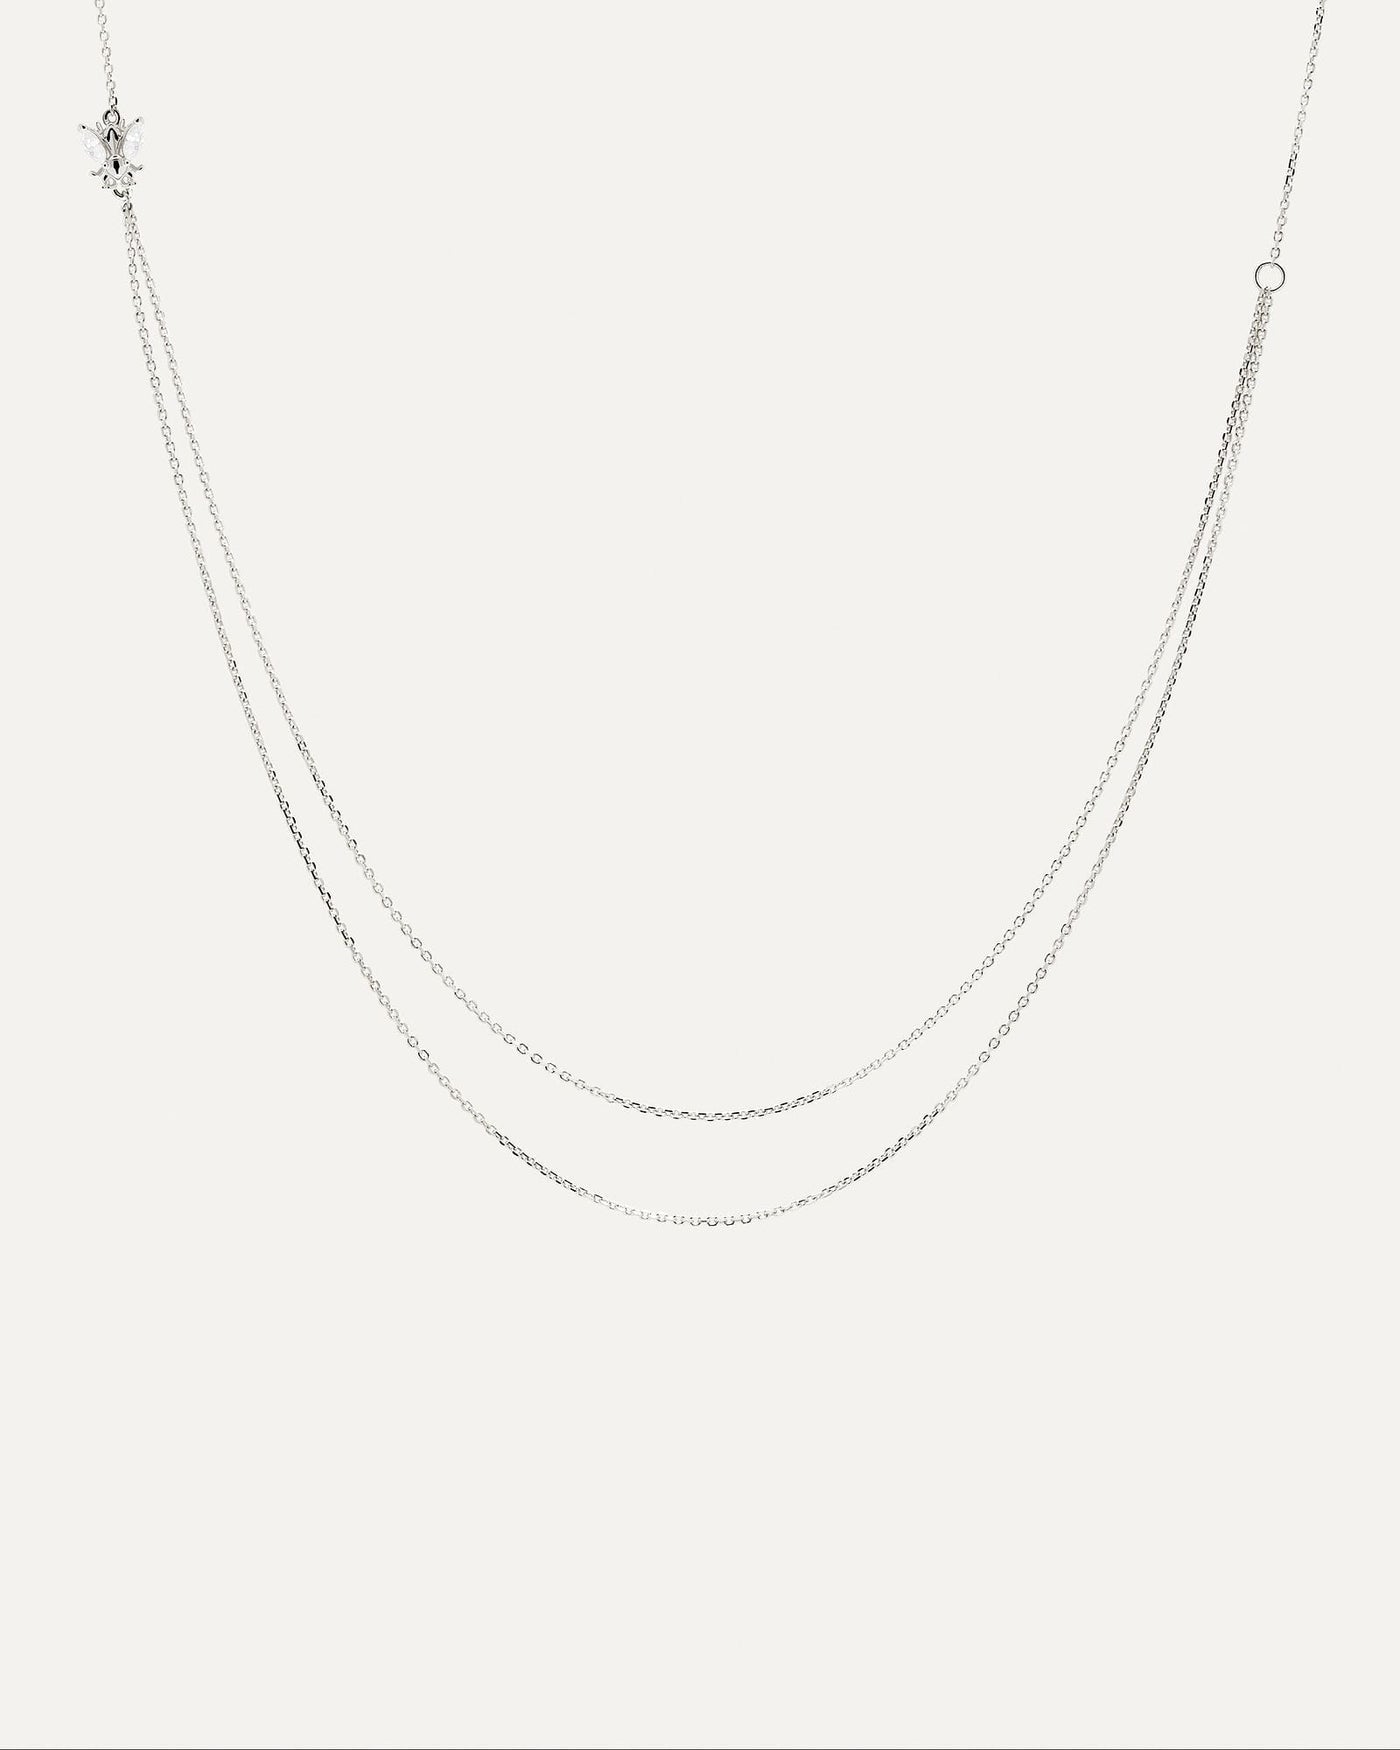 2024 Selection | Breeze Silver Necklace. Get the latest arrival from PDPAOLA. Place your order safely and get this Best Seller. Free Shipping over 40€